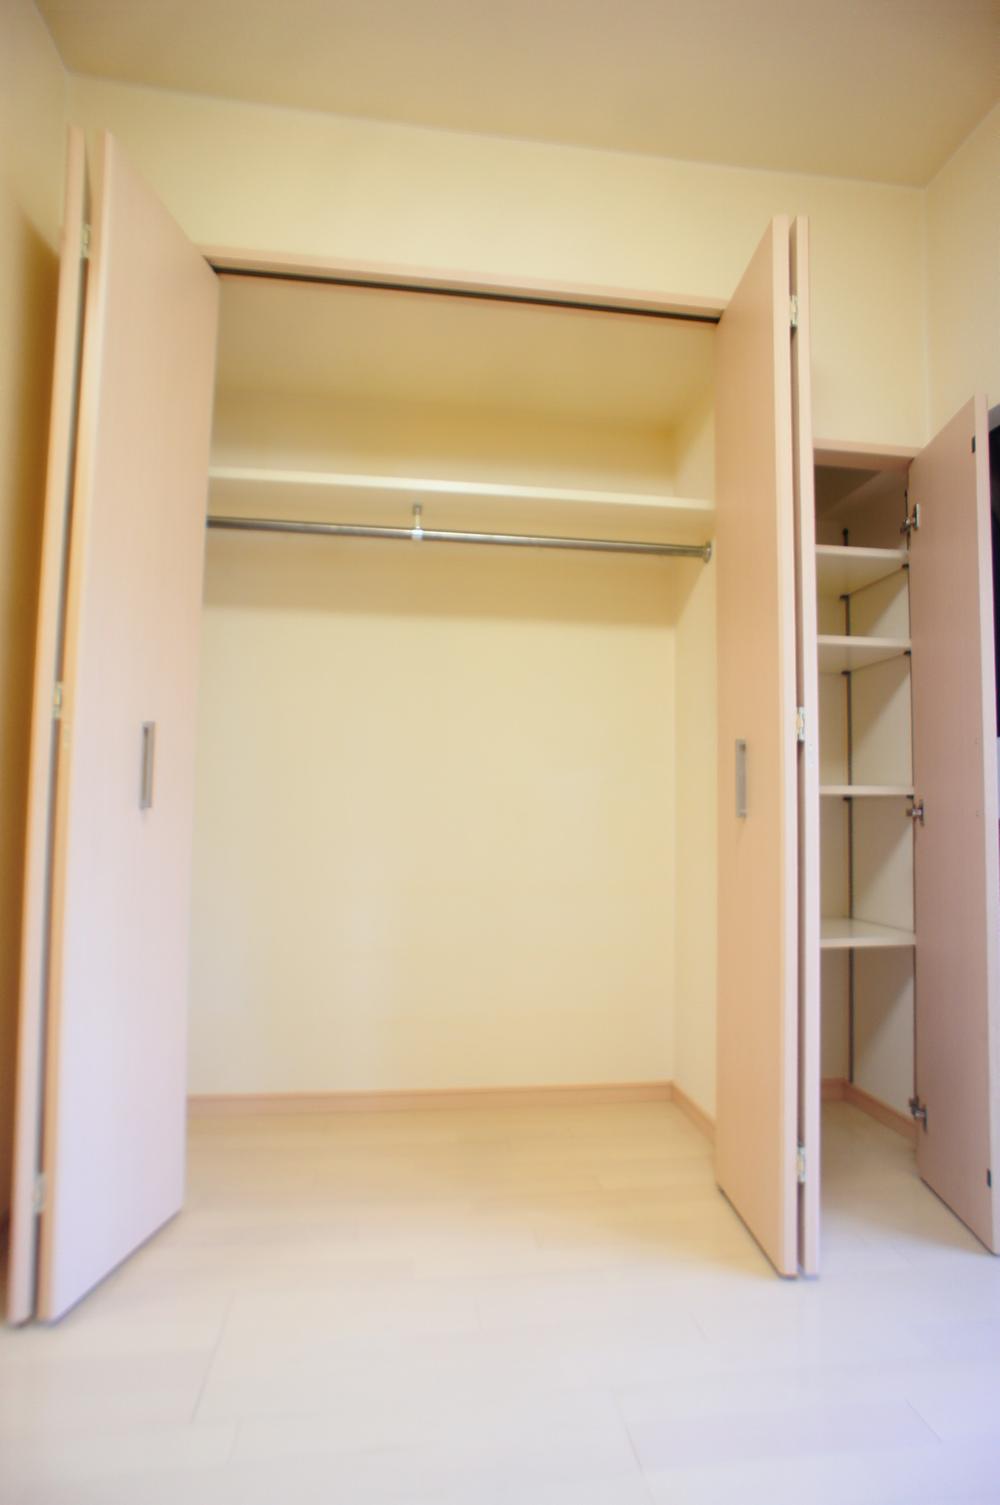 Receipt. Western-style room has storage capacity with a closet and a storage compartment.